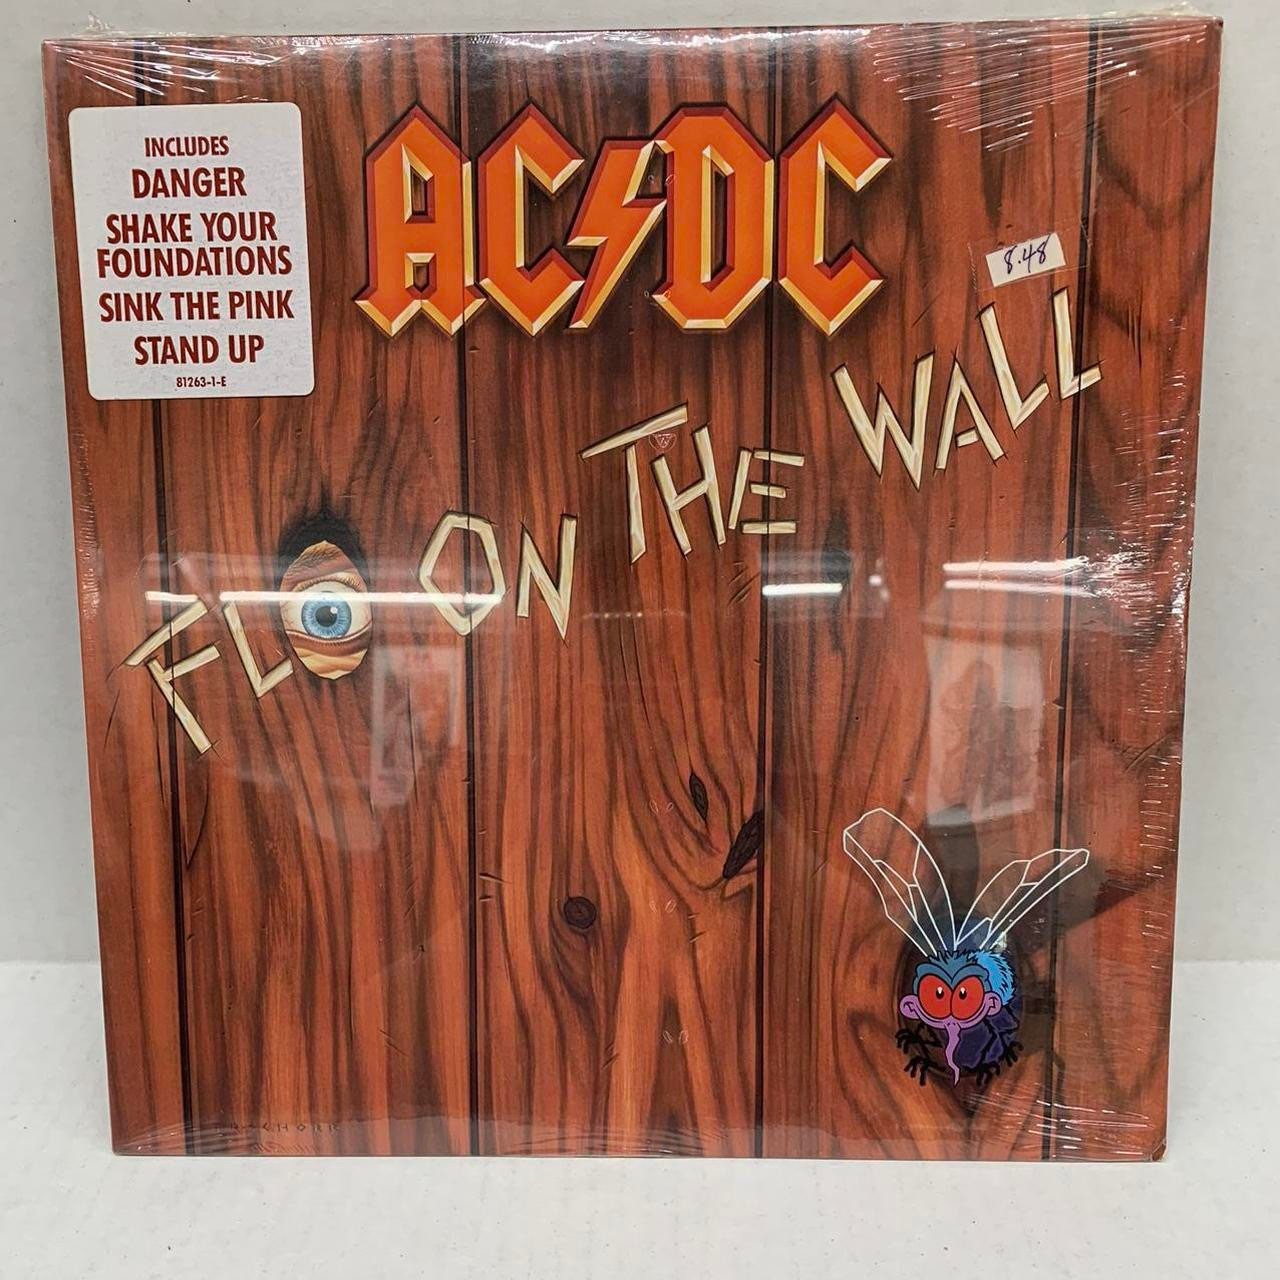 AC/DC - Vinilo Fly On The Wall